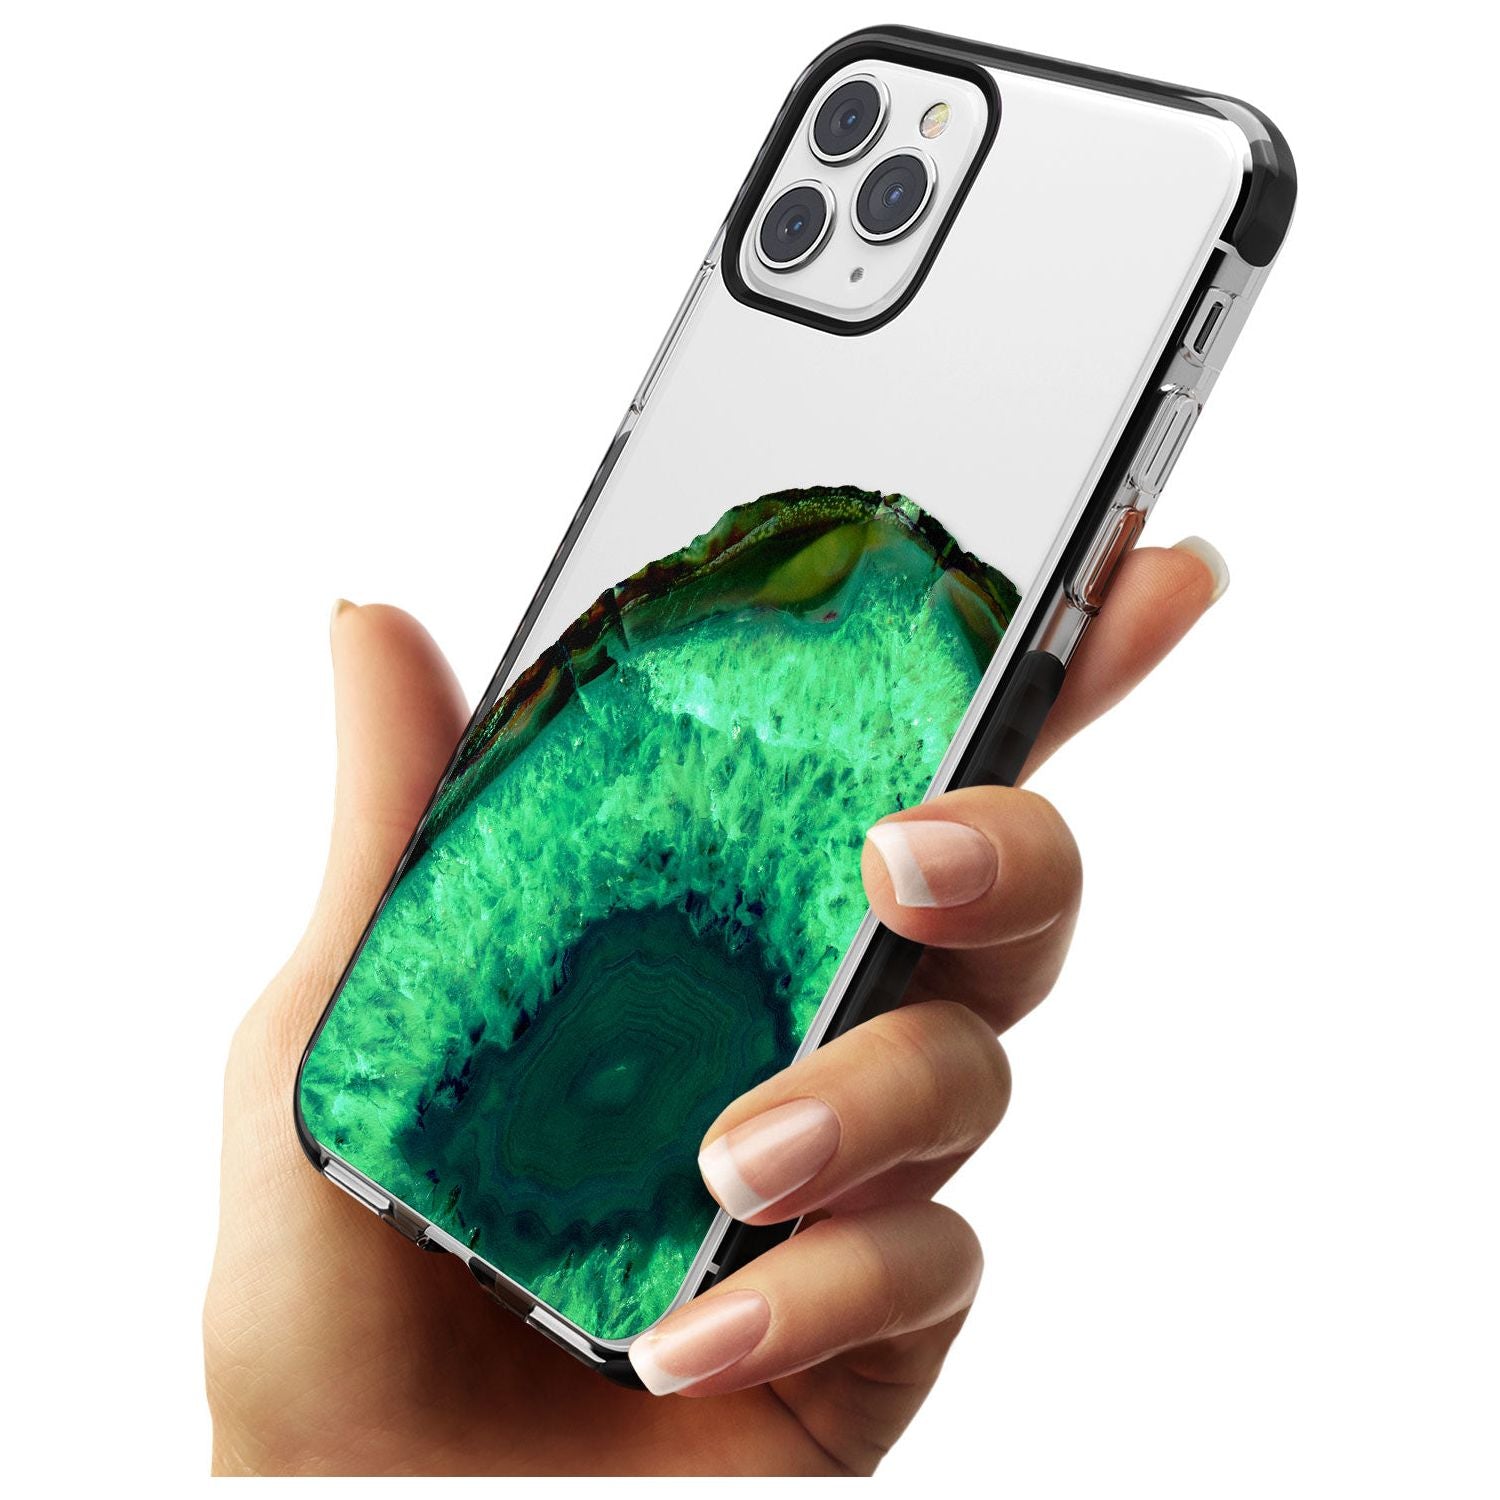 Emerald Green Gemstone Crystal Clear Design Black Impact Phone Case for iPhone 11 Pro Max